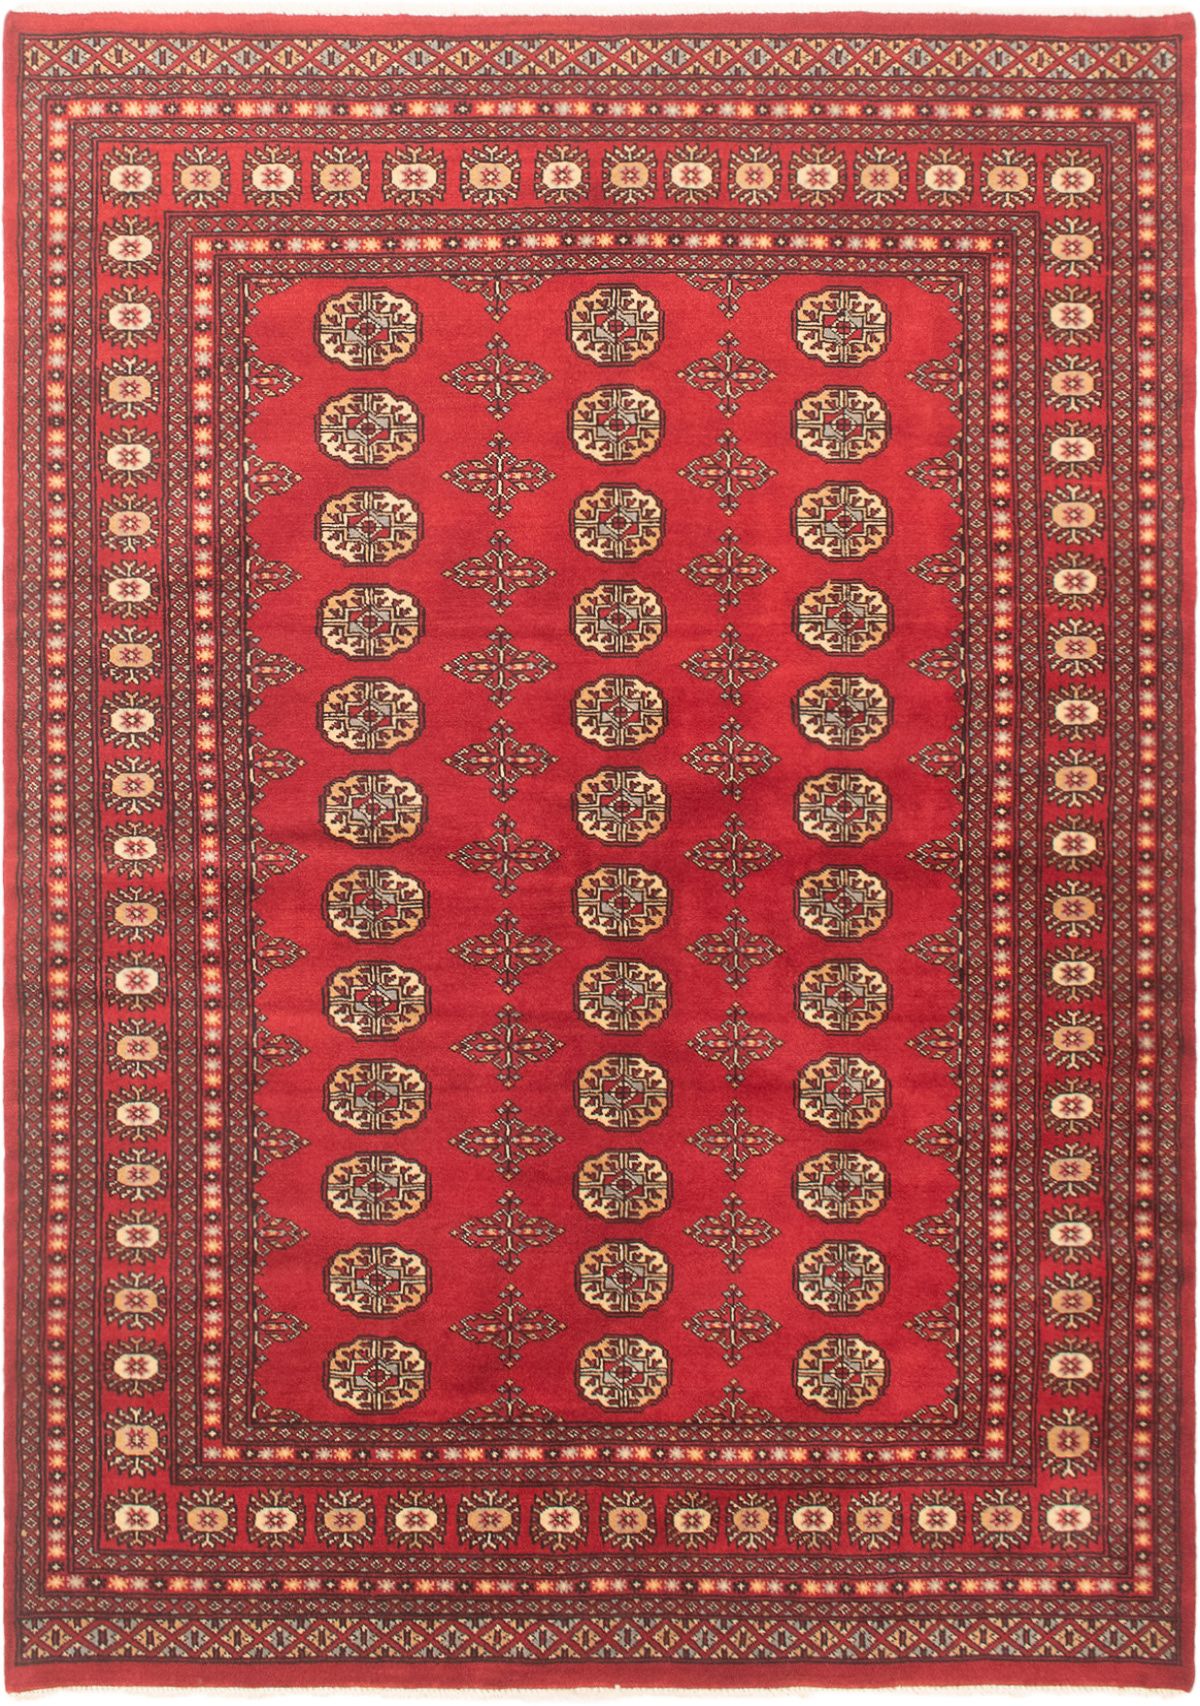 Hand-knotted Finest Peshawar Bokhara Red Wool Rug 5'6" x 7'10"  Size: 5'6" x 7'10"  